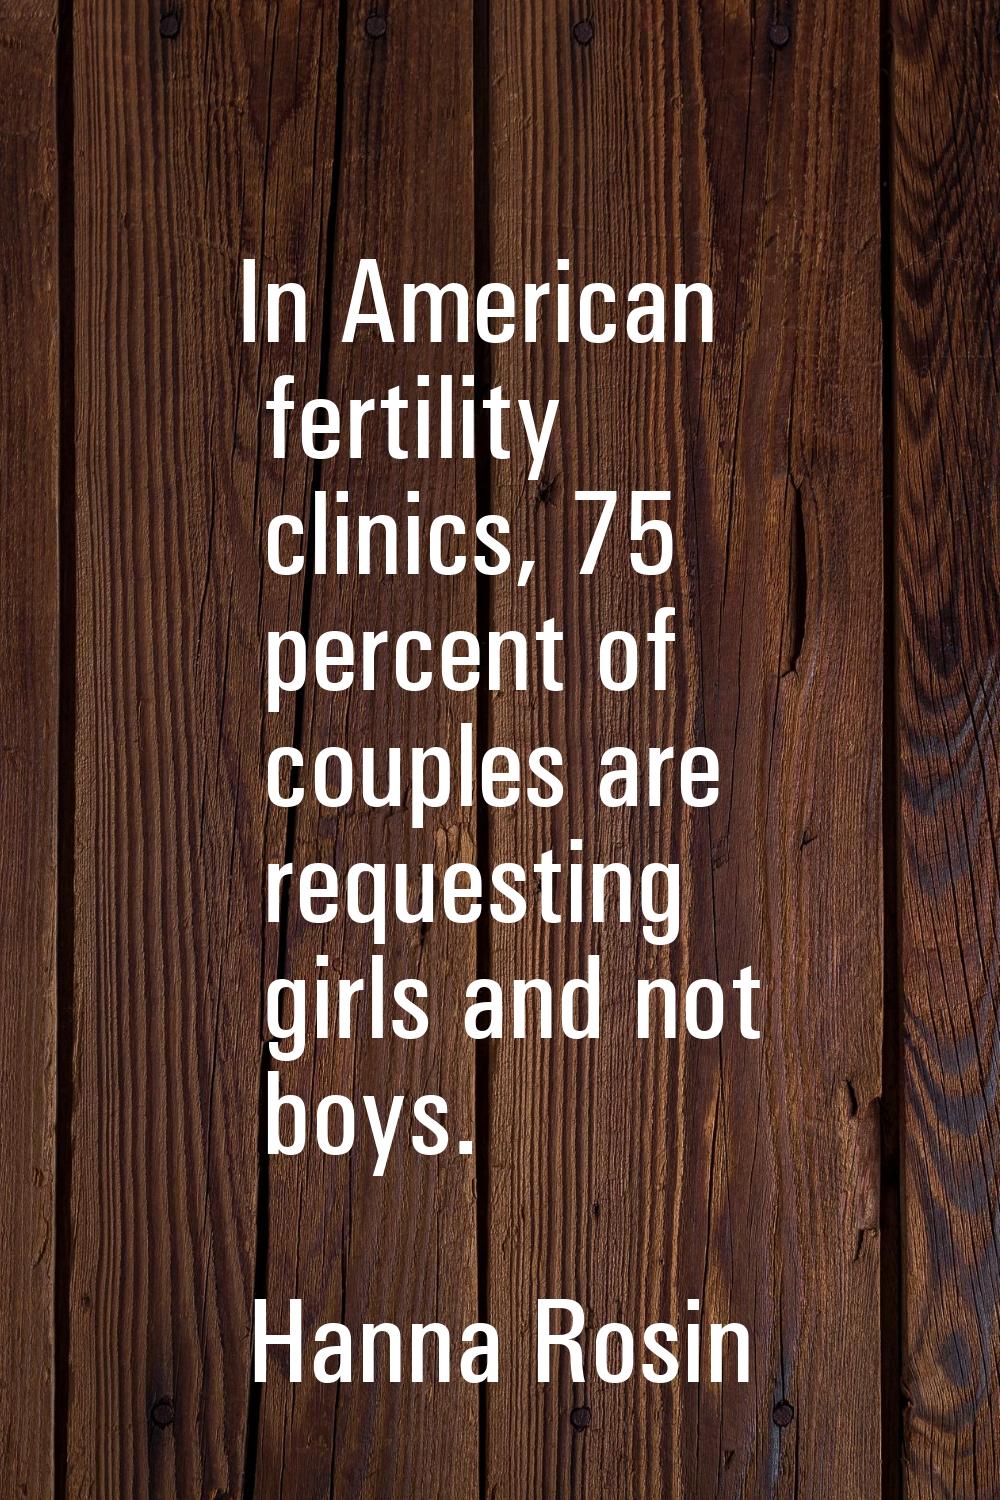 In American fertility clinics, 75 percent of couples are requesting girls and not boys.